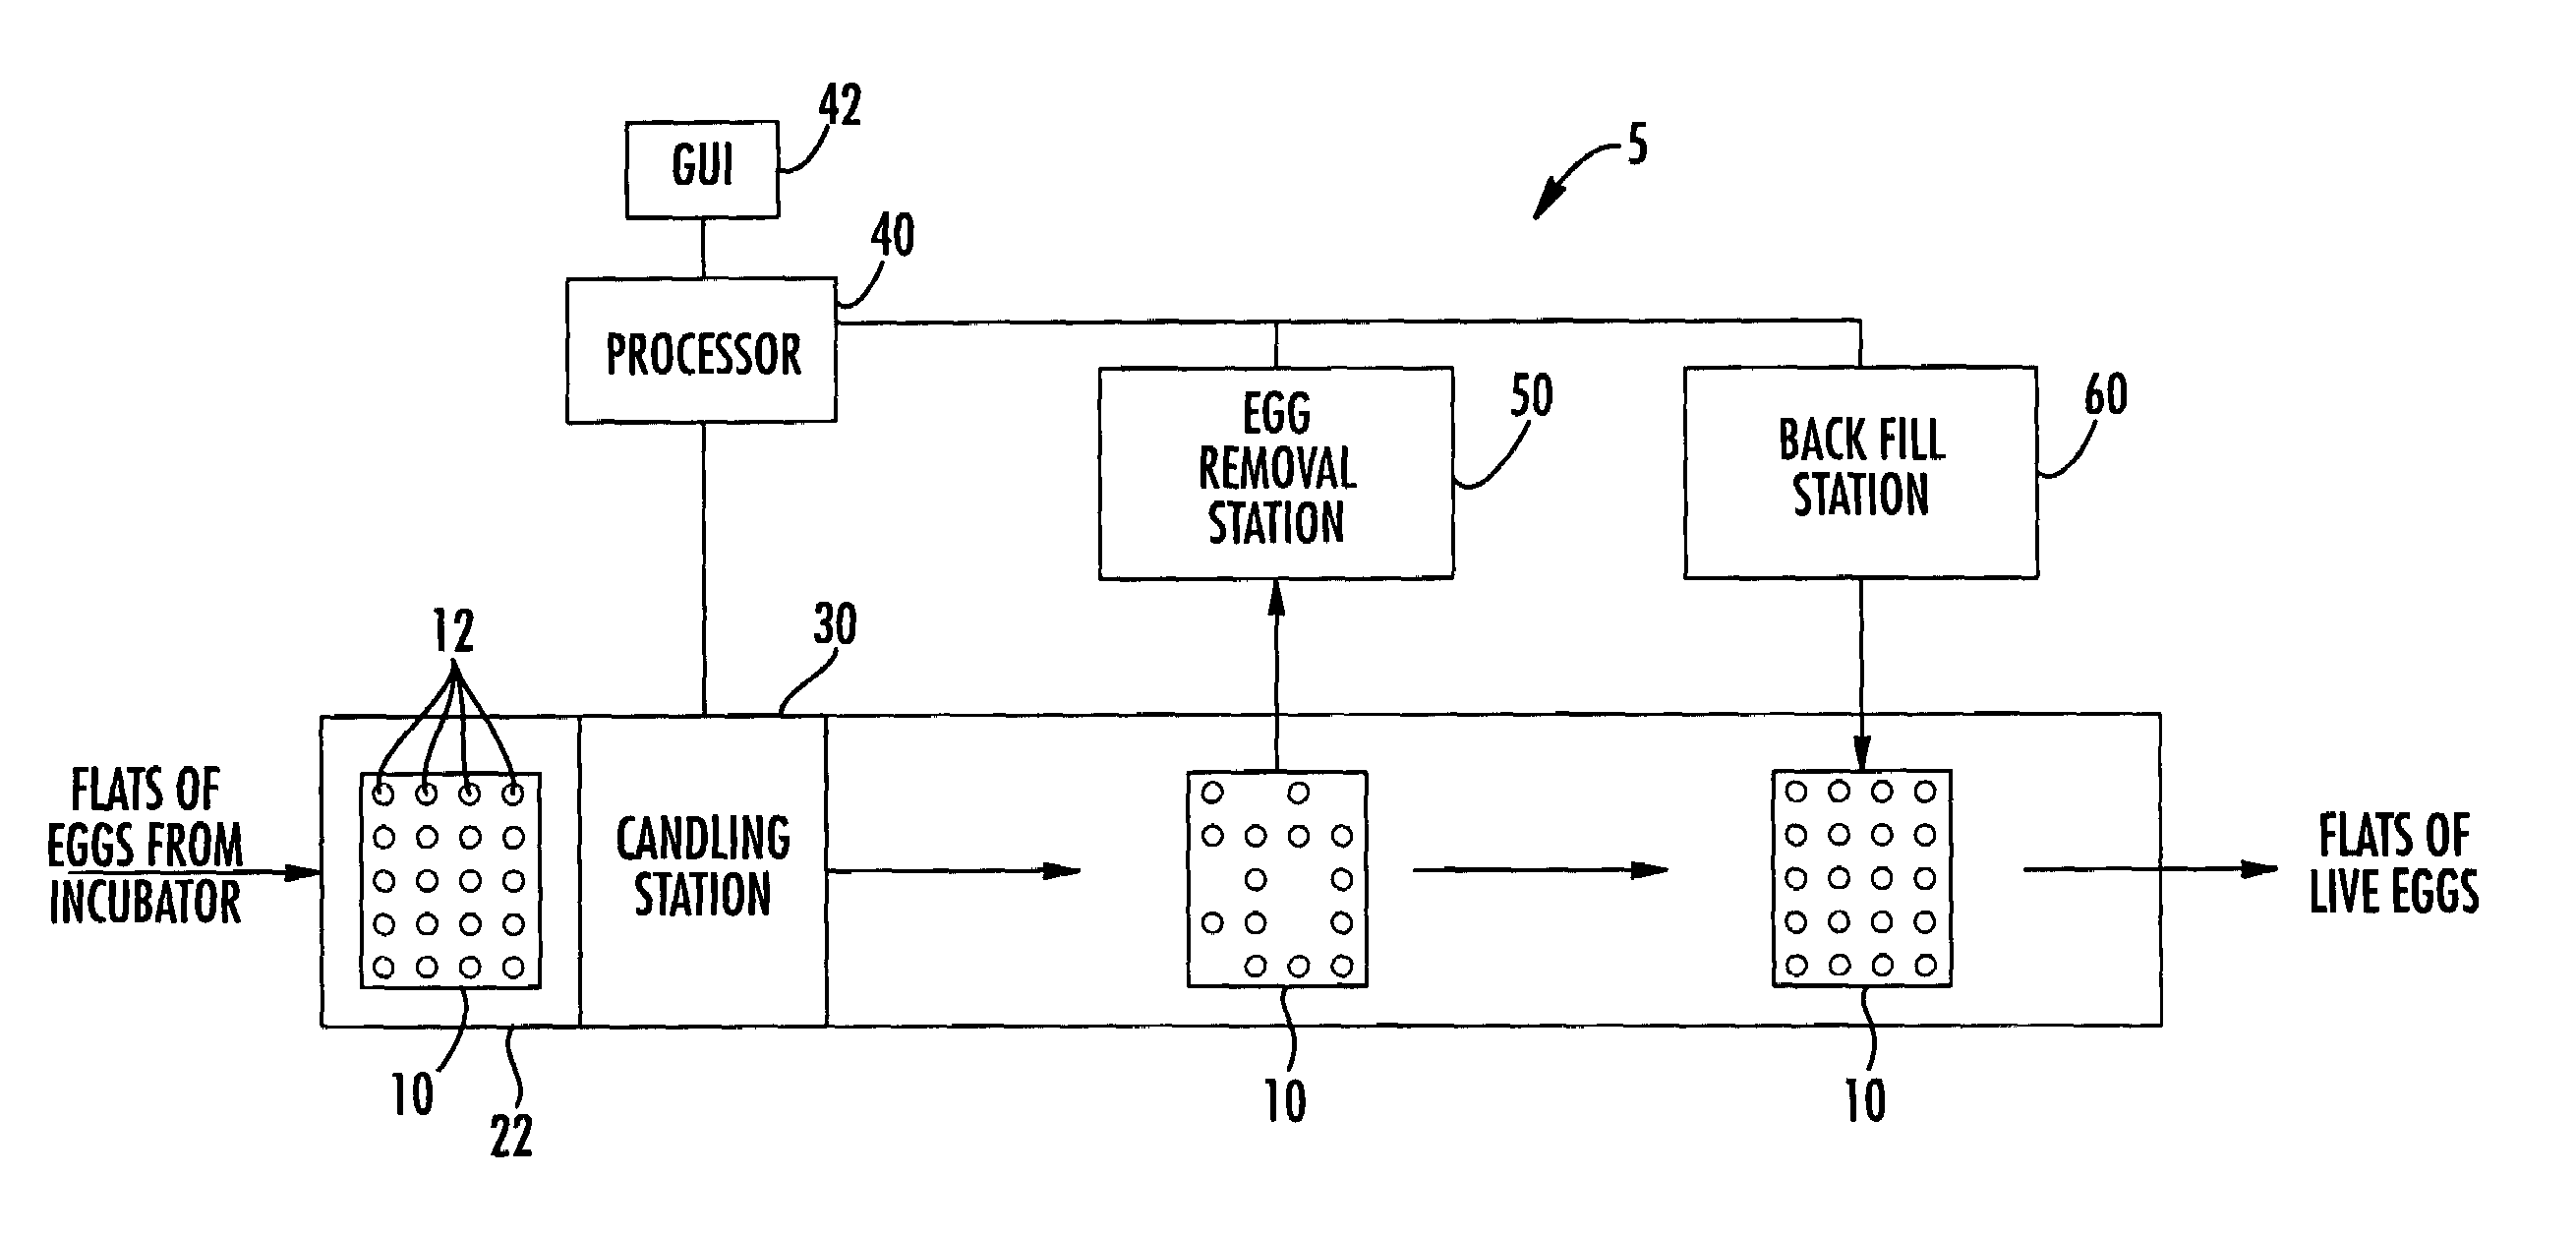 Methods and apparatus for identifying and diagnosing live eggs using heart rate and embryo motion